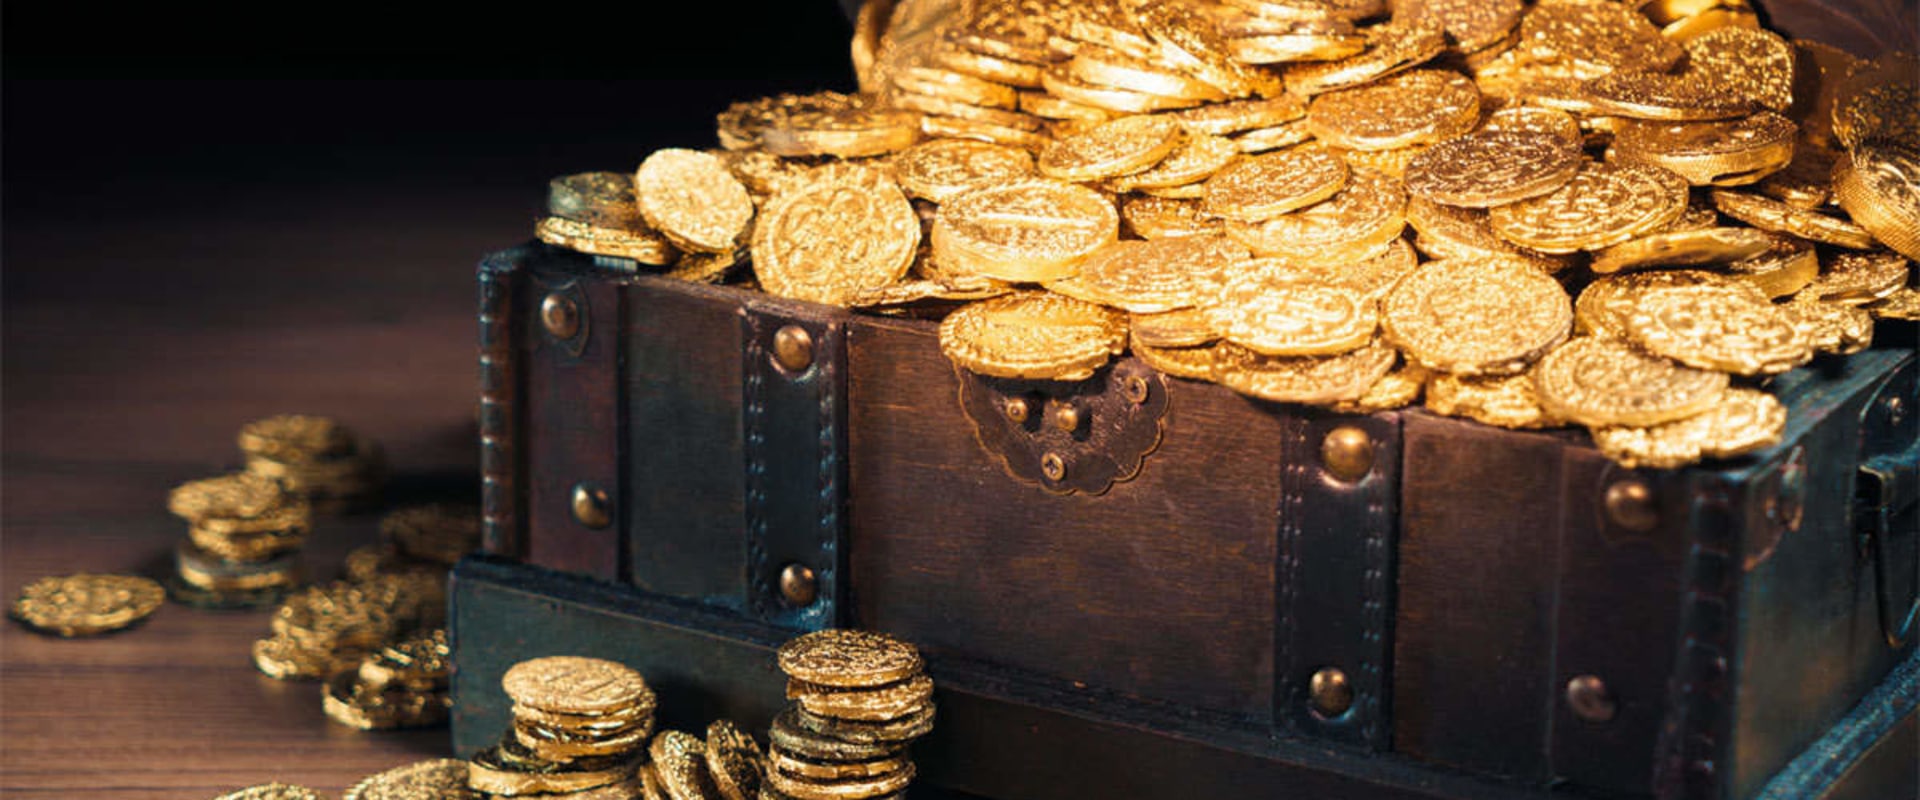 Is it better to buy gold in person or online?